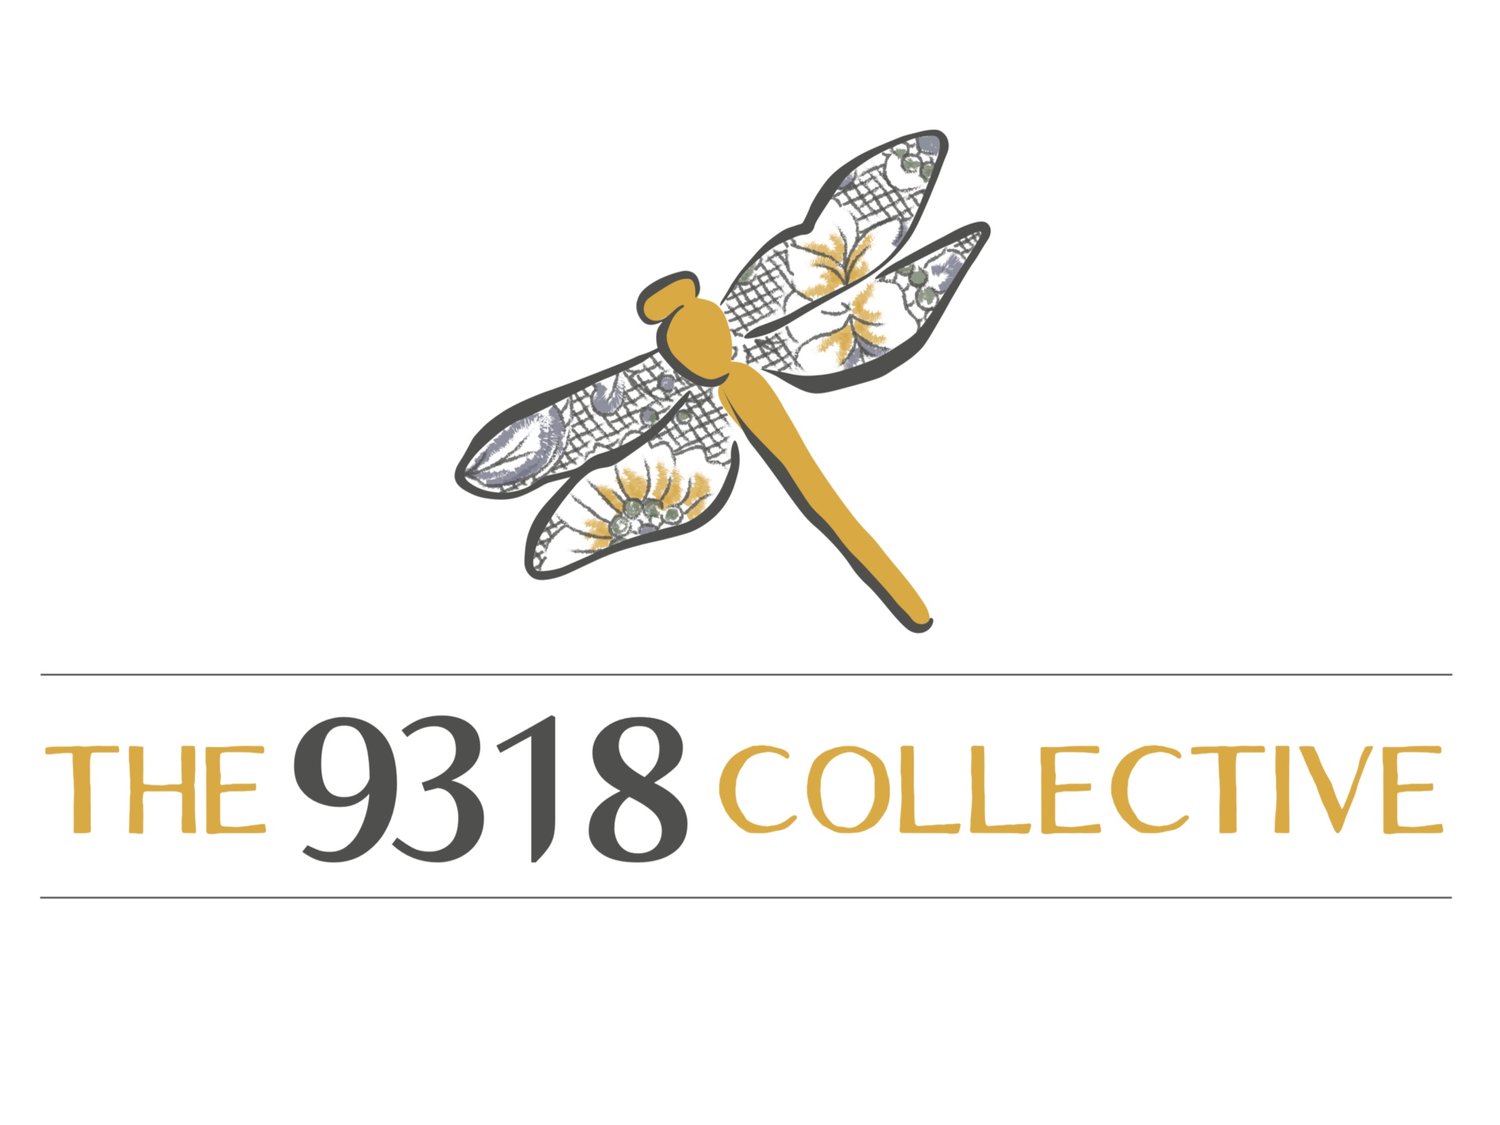 The 9318 Collective